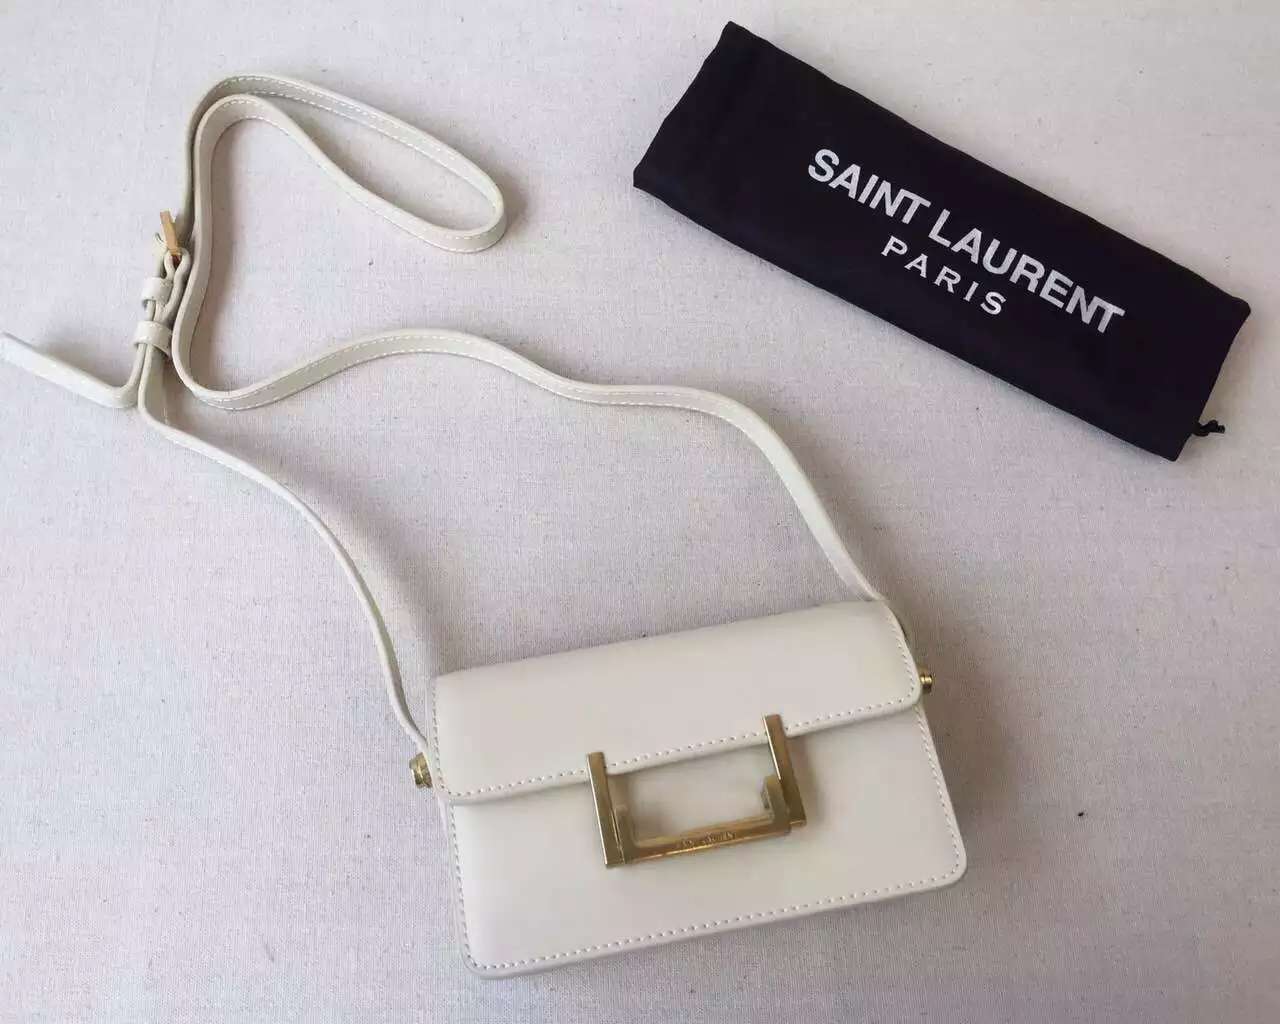 2015 Cheap YSL Out-Sale with Free Shipping-Saint Laurent Classic Small Lulu Leather Bag in white Calfskin Leather